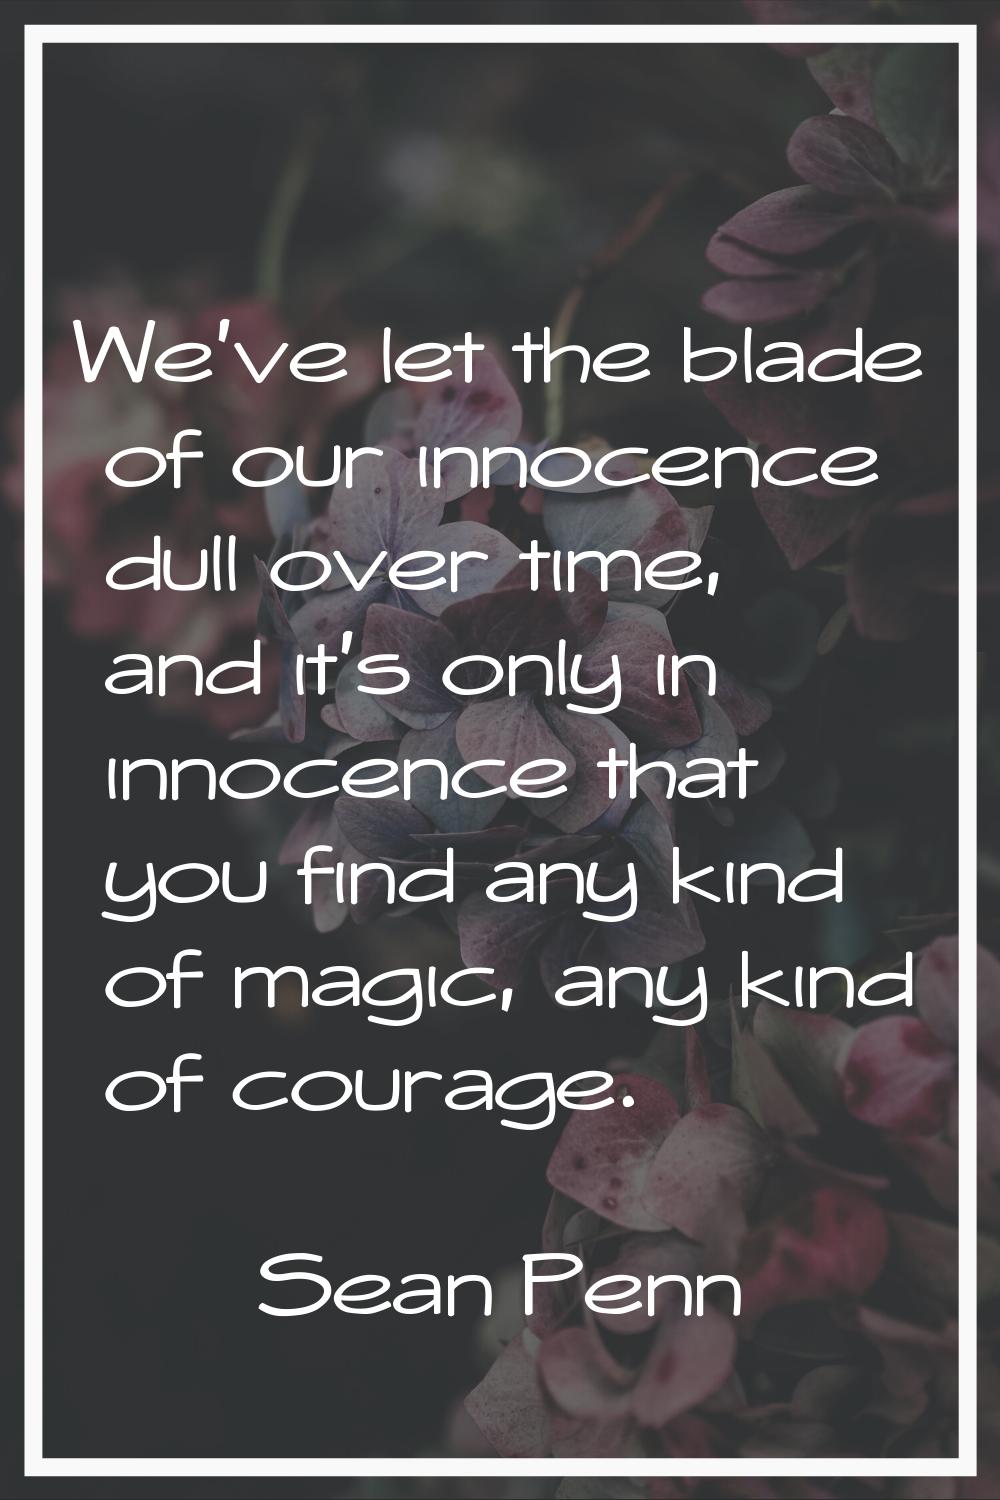 We've let the blade of our innocence dull over time, and it's only in innocence that you find any k